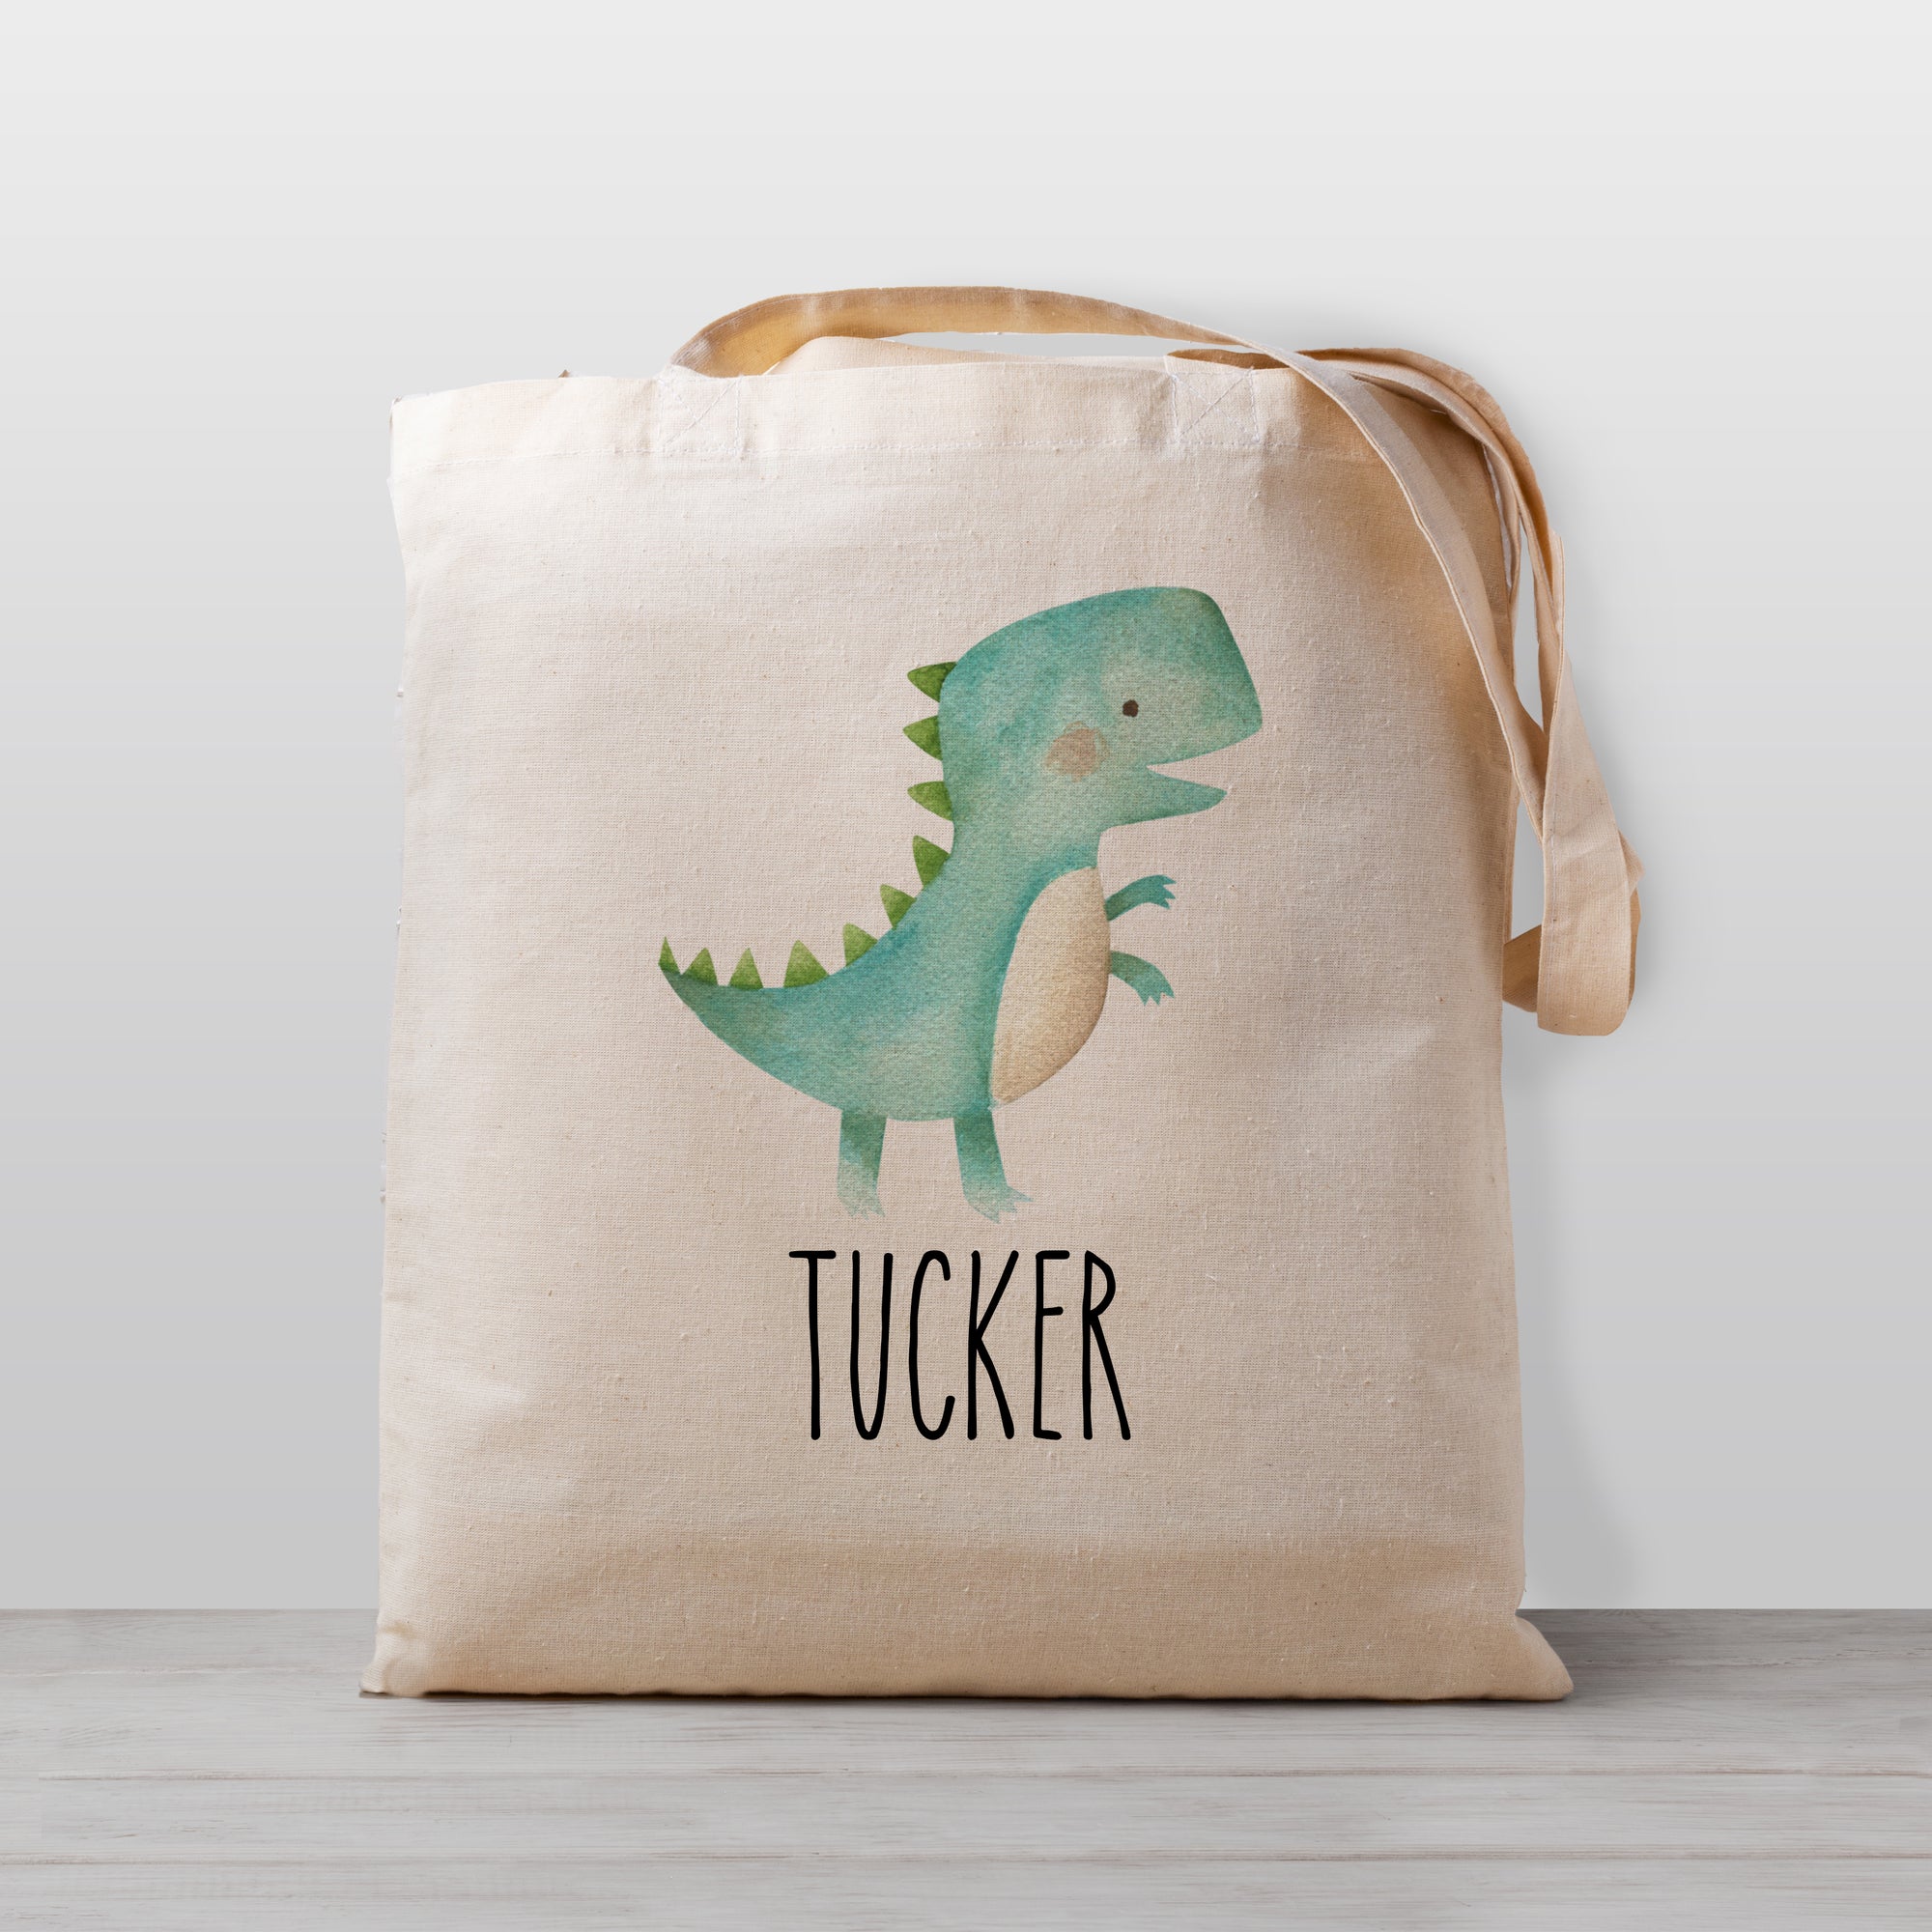 Kids Personalized dinosaur tote bag with tyrannosaurus rex (T-rex), 100% natural cotton canvas